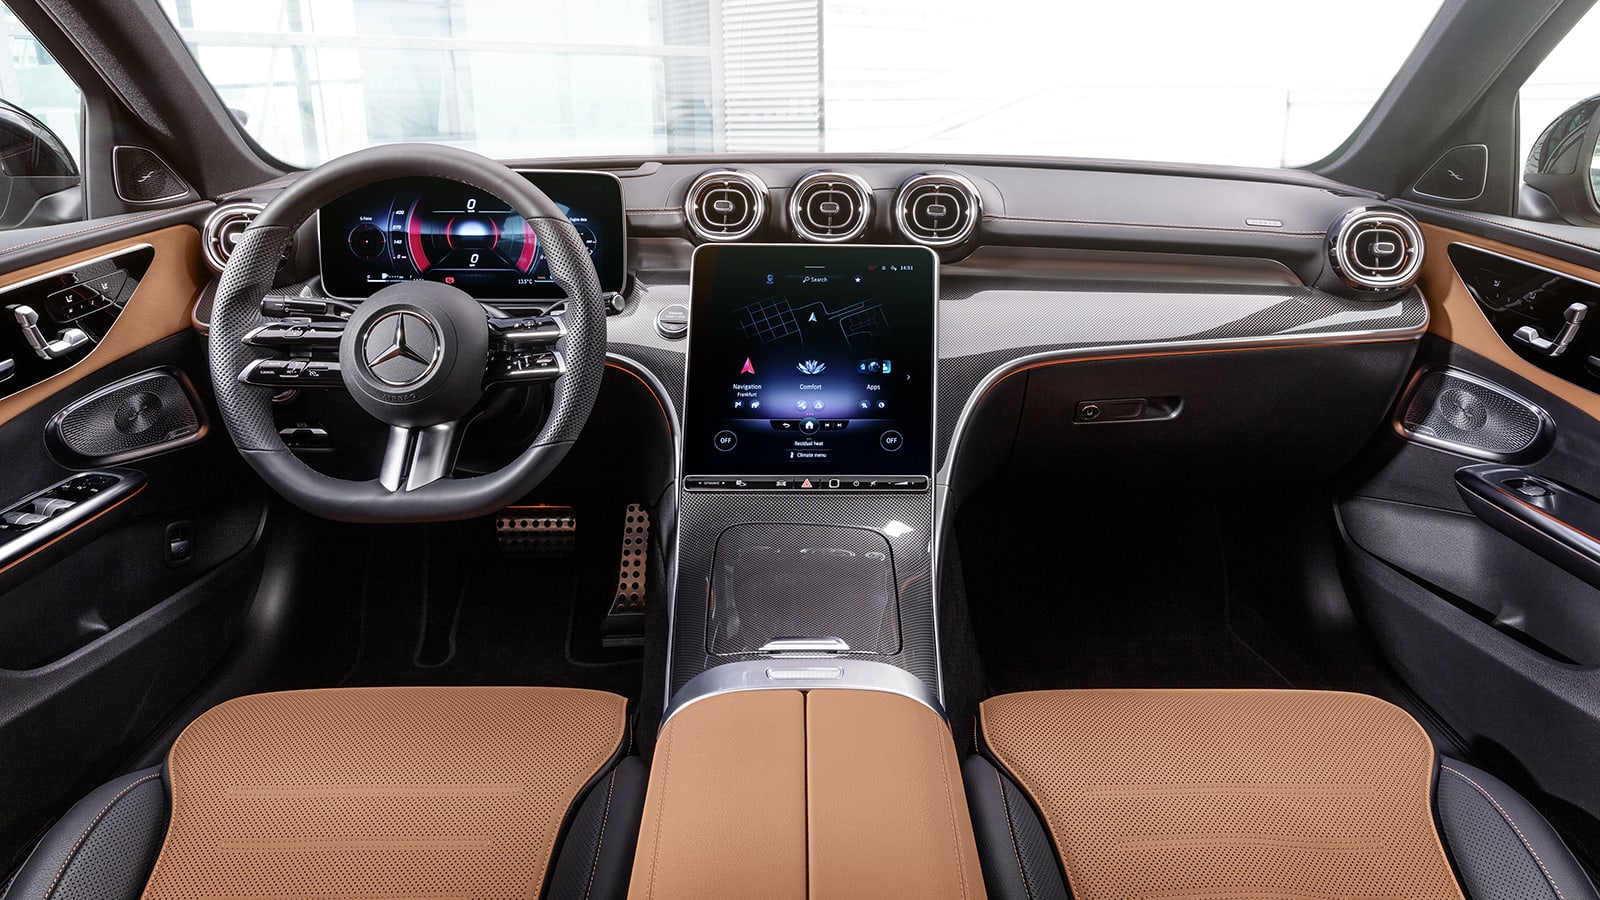 2022 Mercedes-Benz C-Class revealed with S-Class-style interior - Autoblog